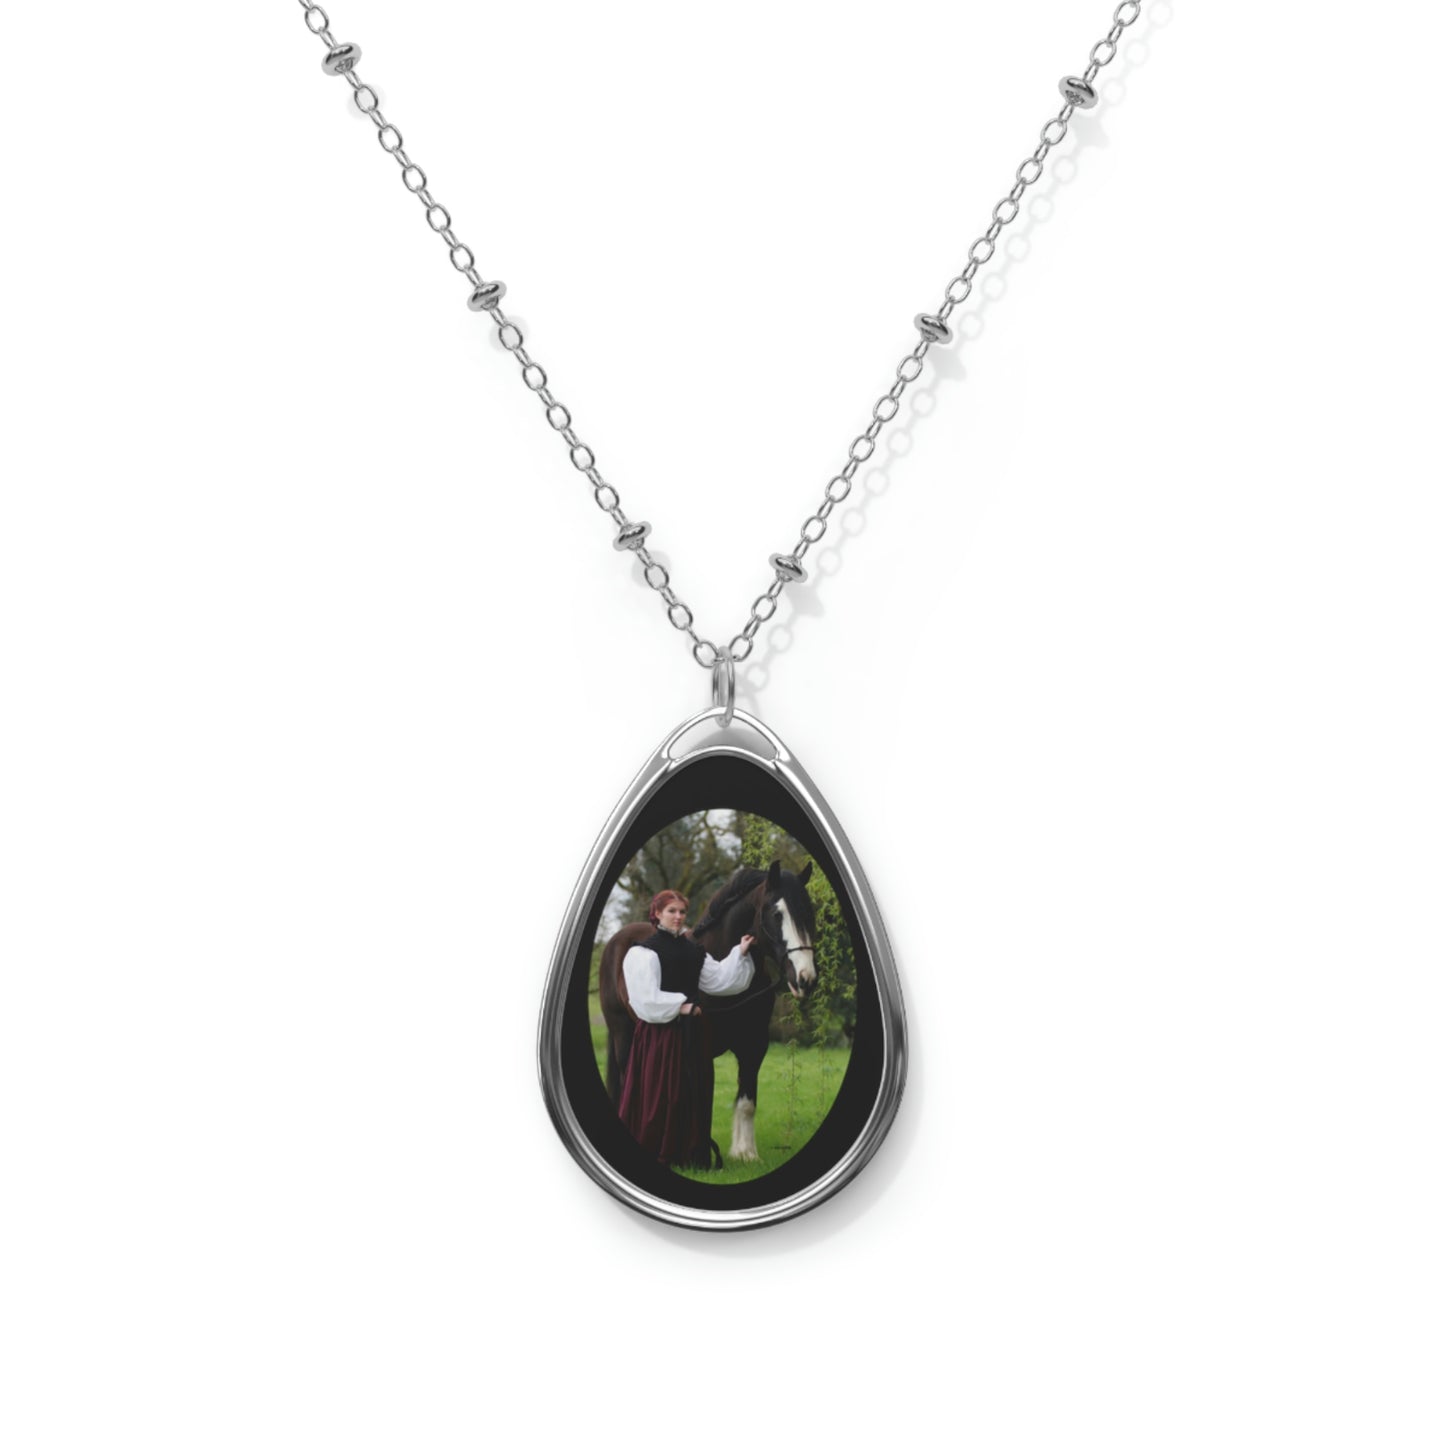 The Lady and the Shire    Oval Necklace